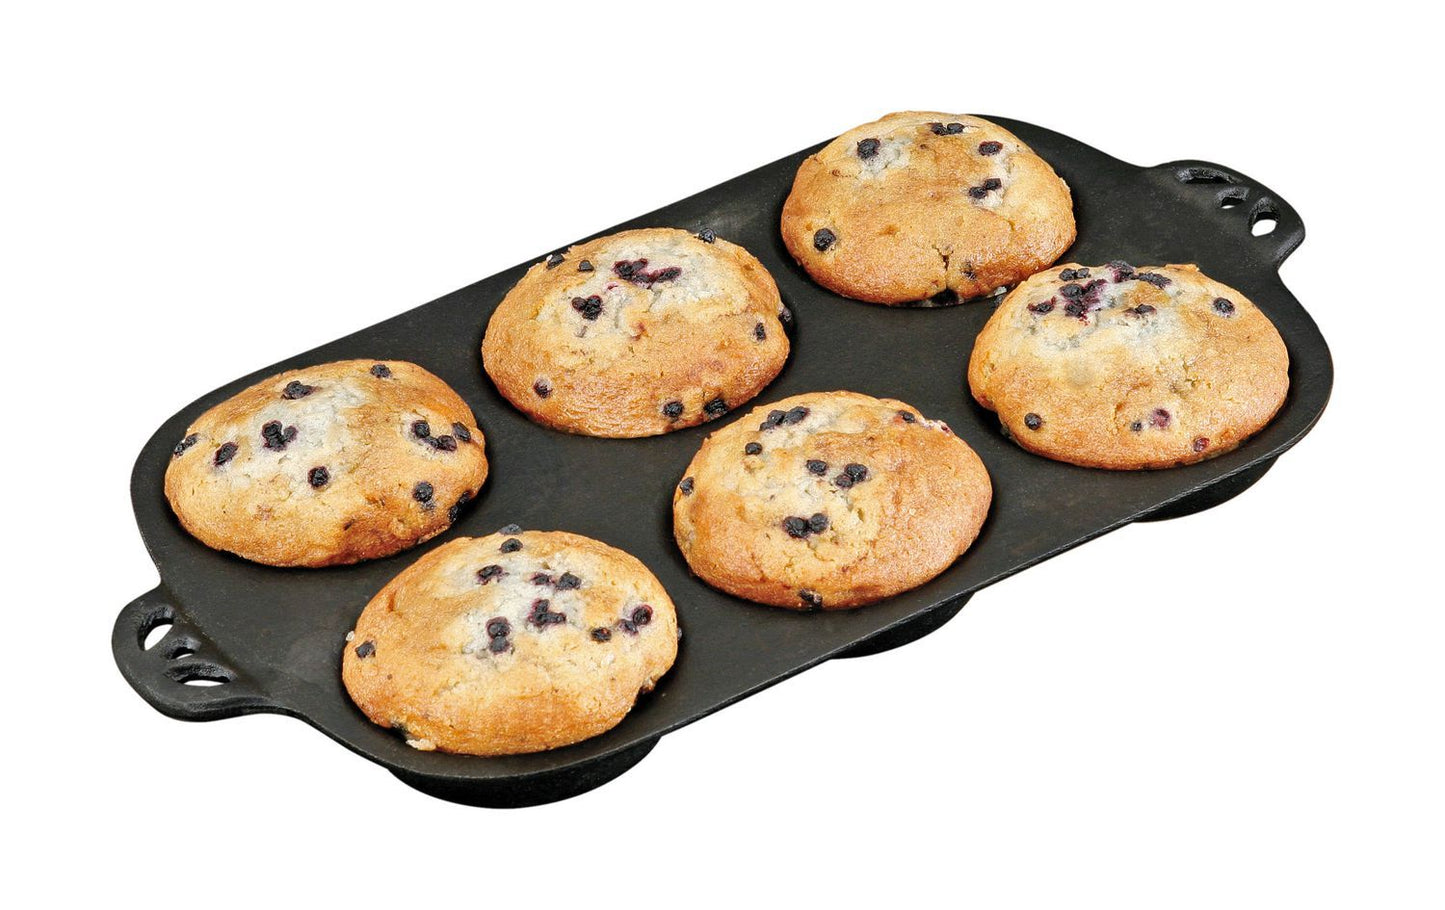 Cast Iron Muffin Top Pan